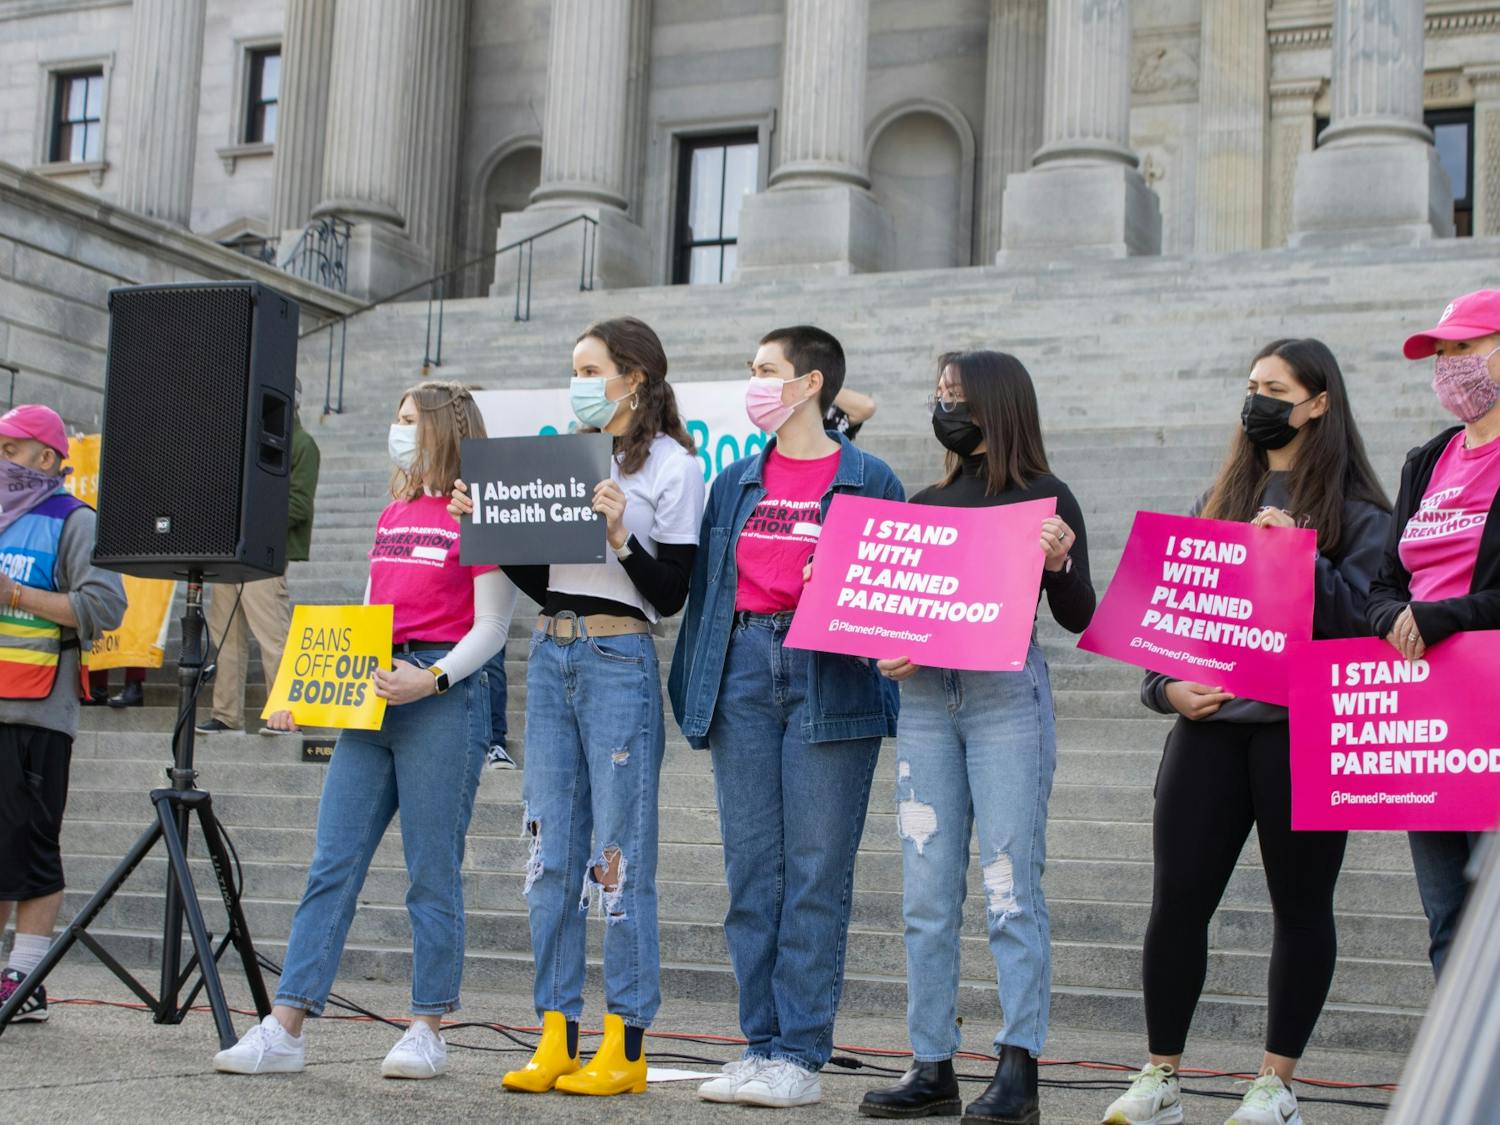 Keep Bans Off Our Bodies': Protestors rally against new anti-abortion bills 